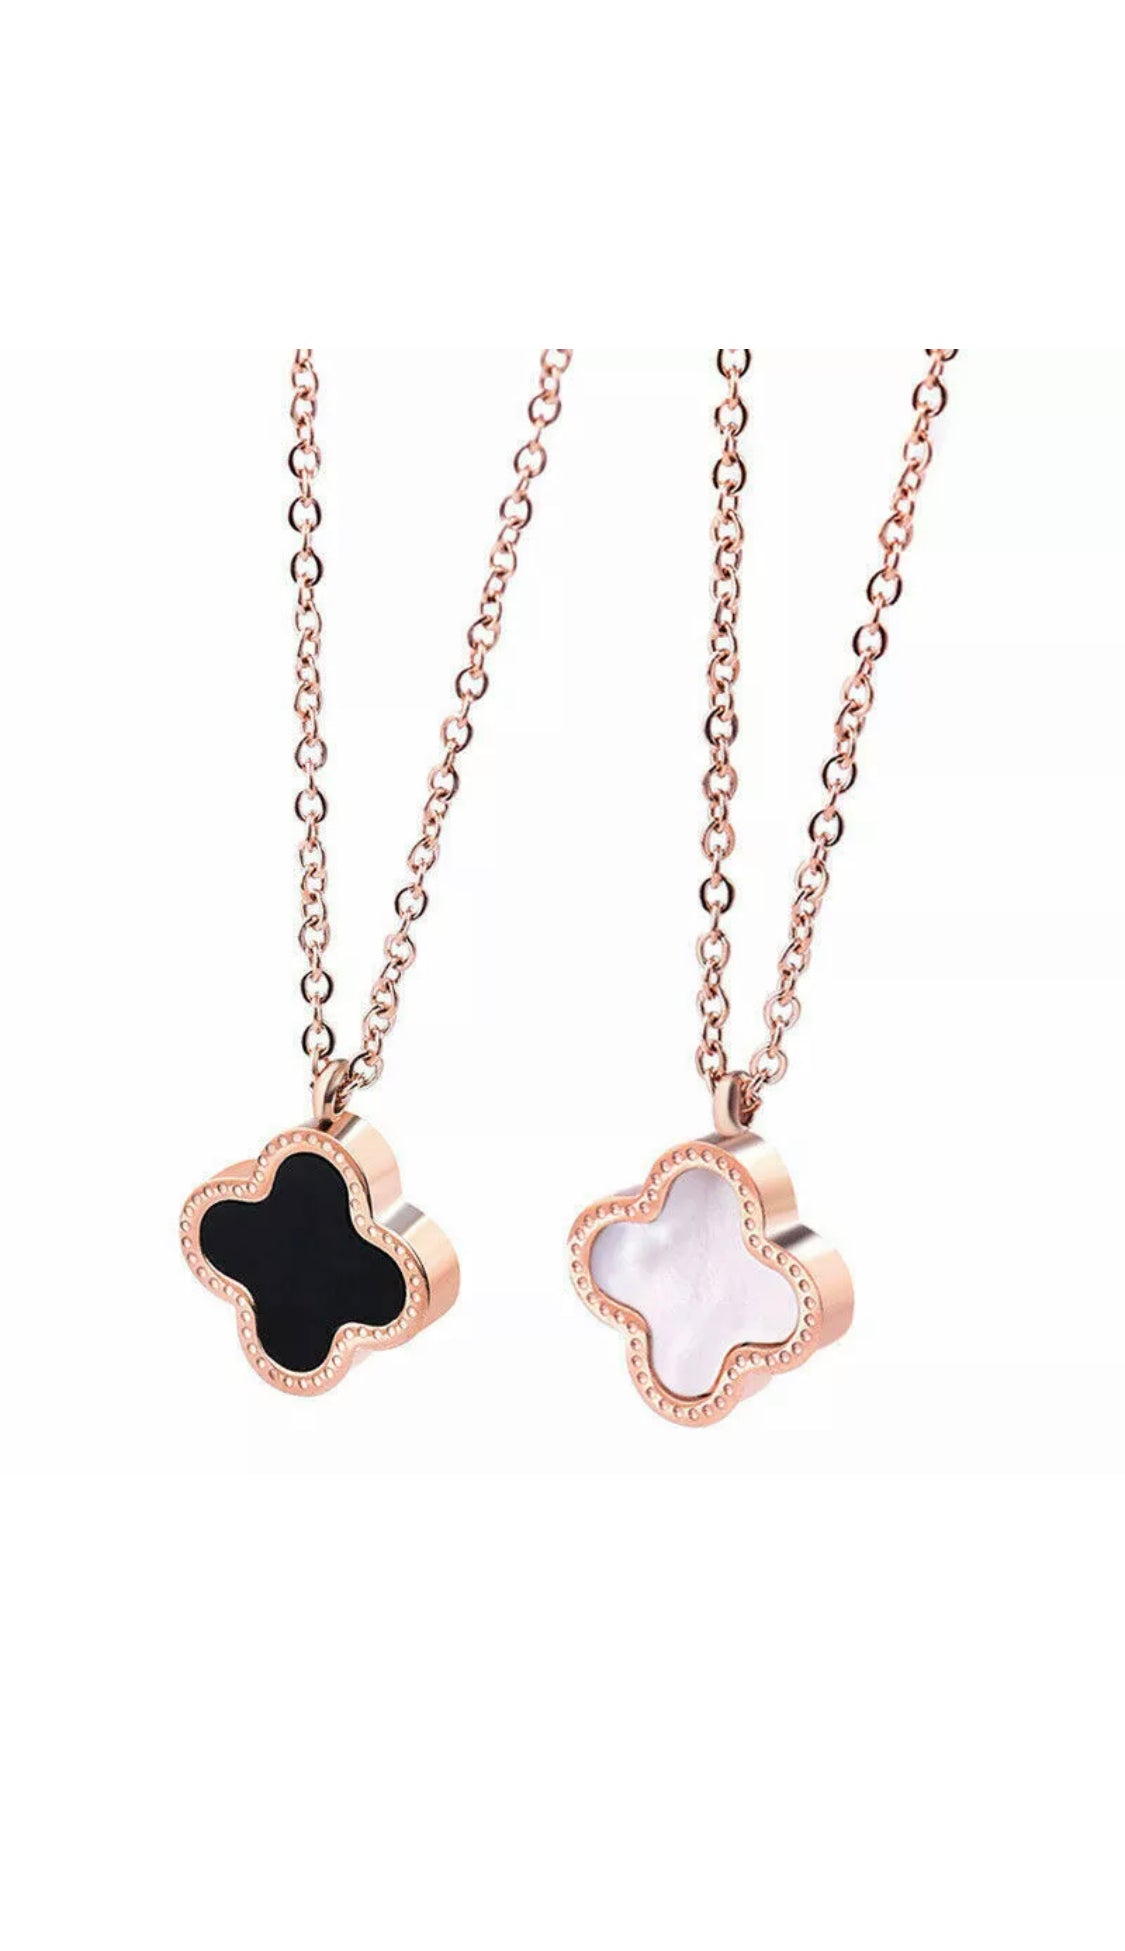 Asha - REVERSIBLE Black & Mother of Pearl Clover Necklace